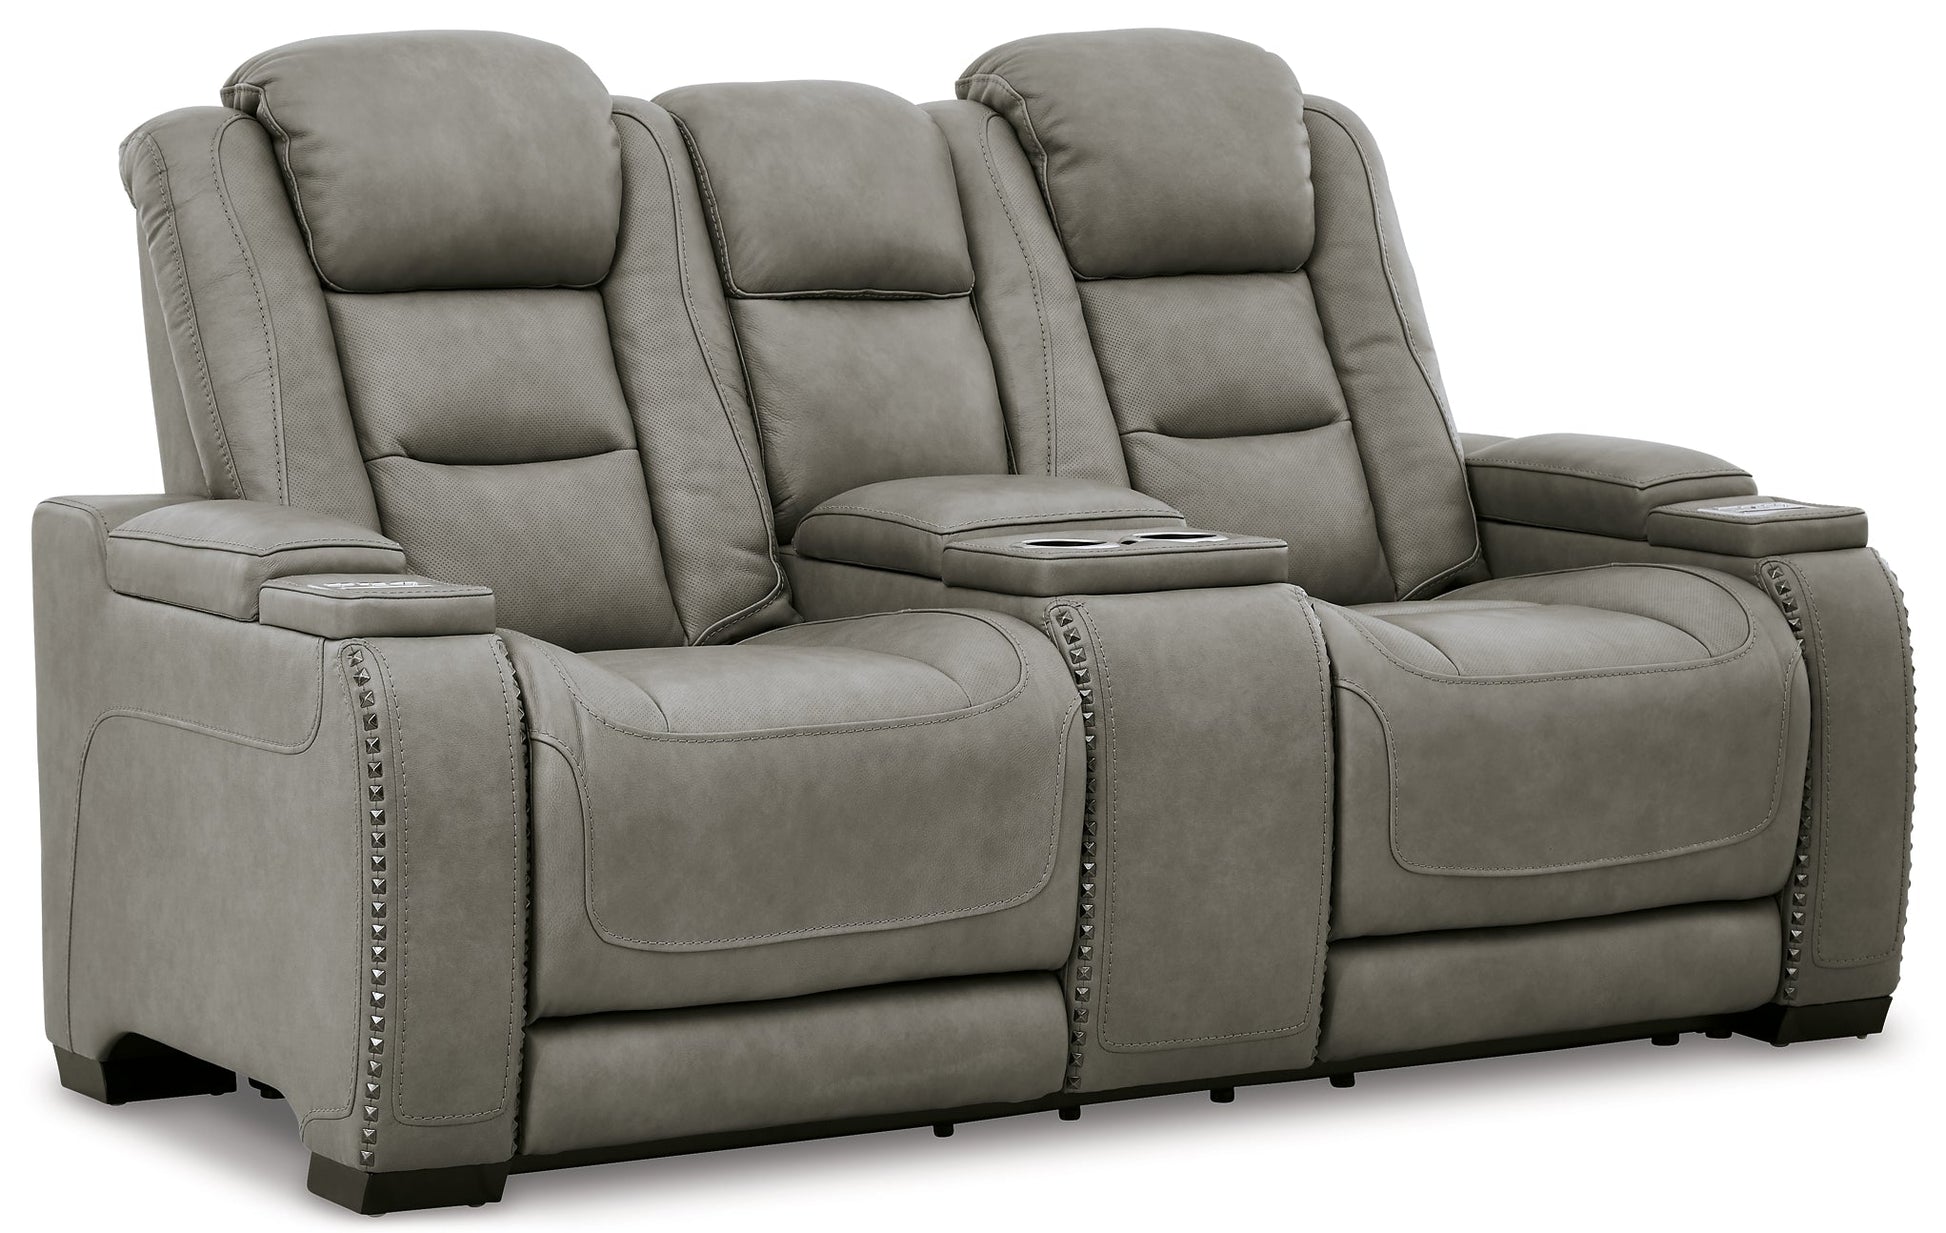 The Man-Den Sofa, Loveseat and Recliner Rent Wise Rent To Own Jacksonville, Florida